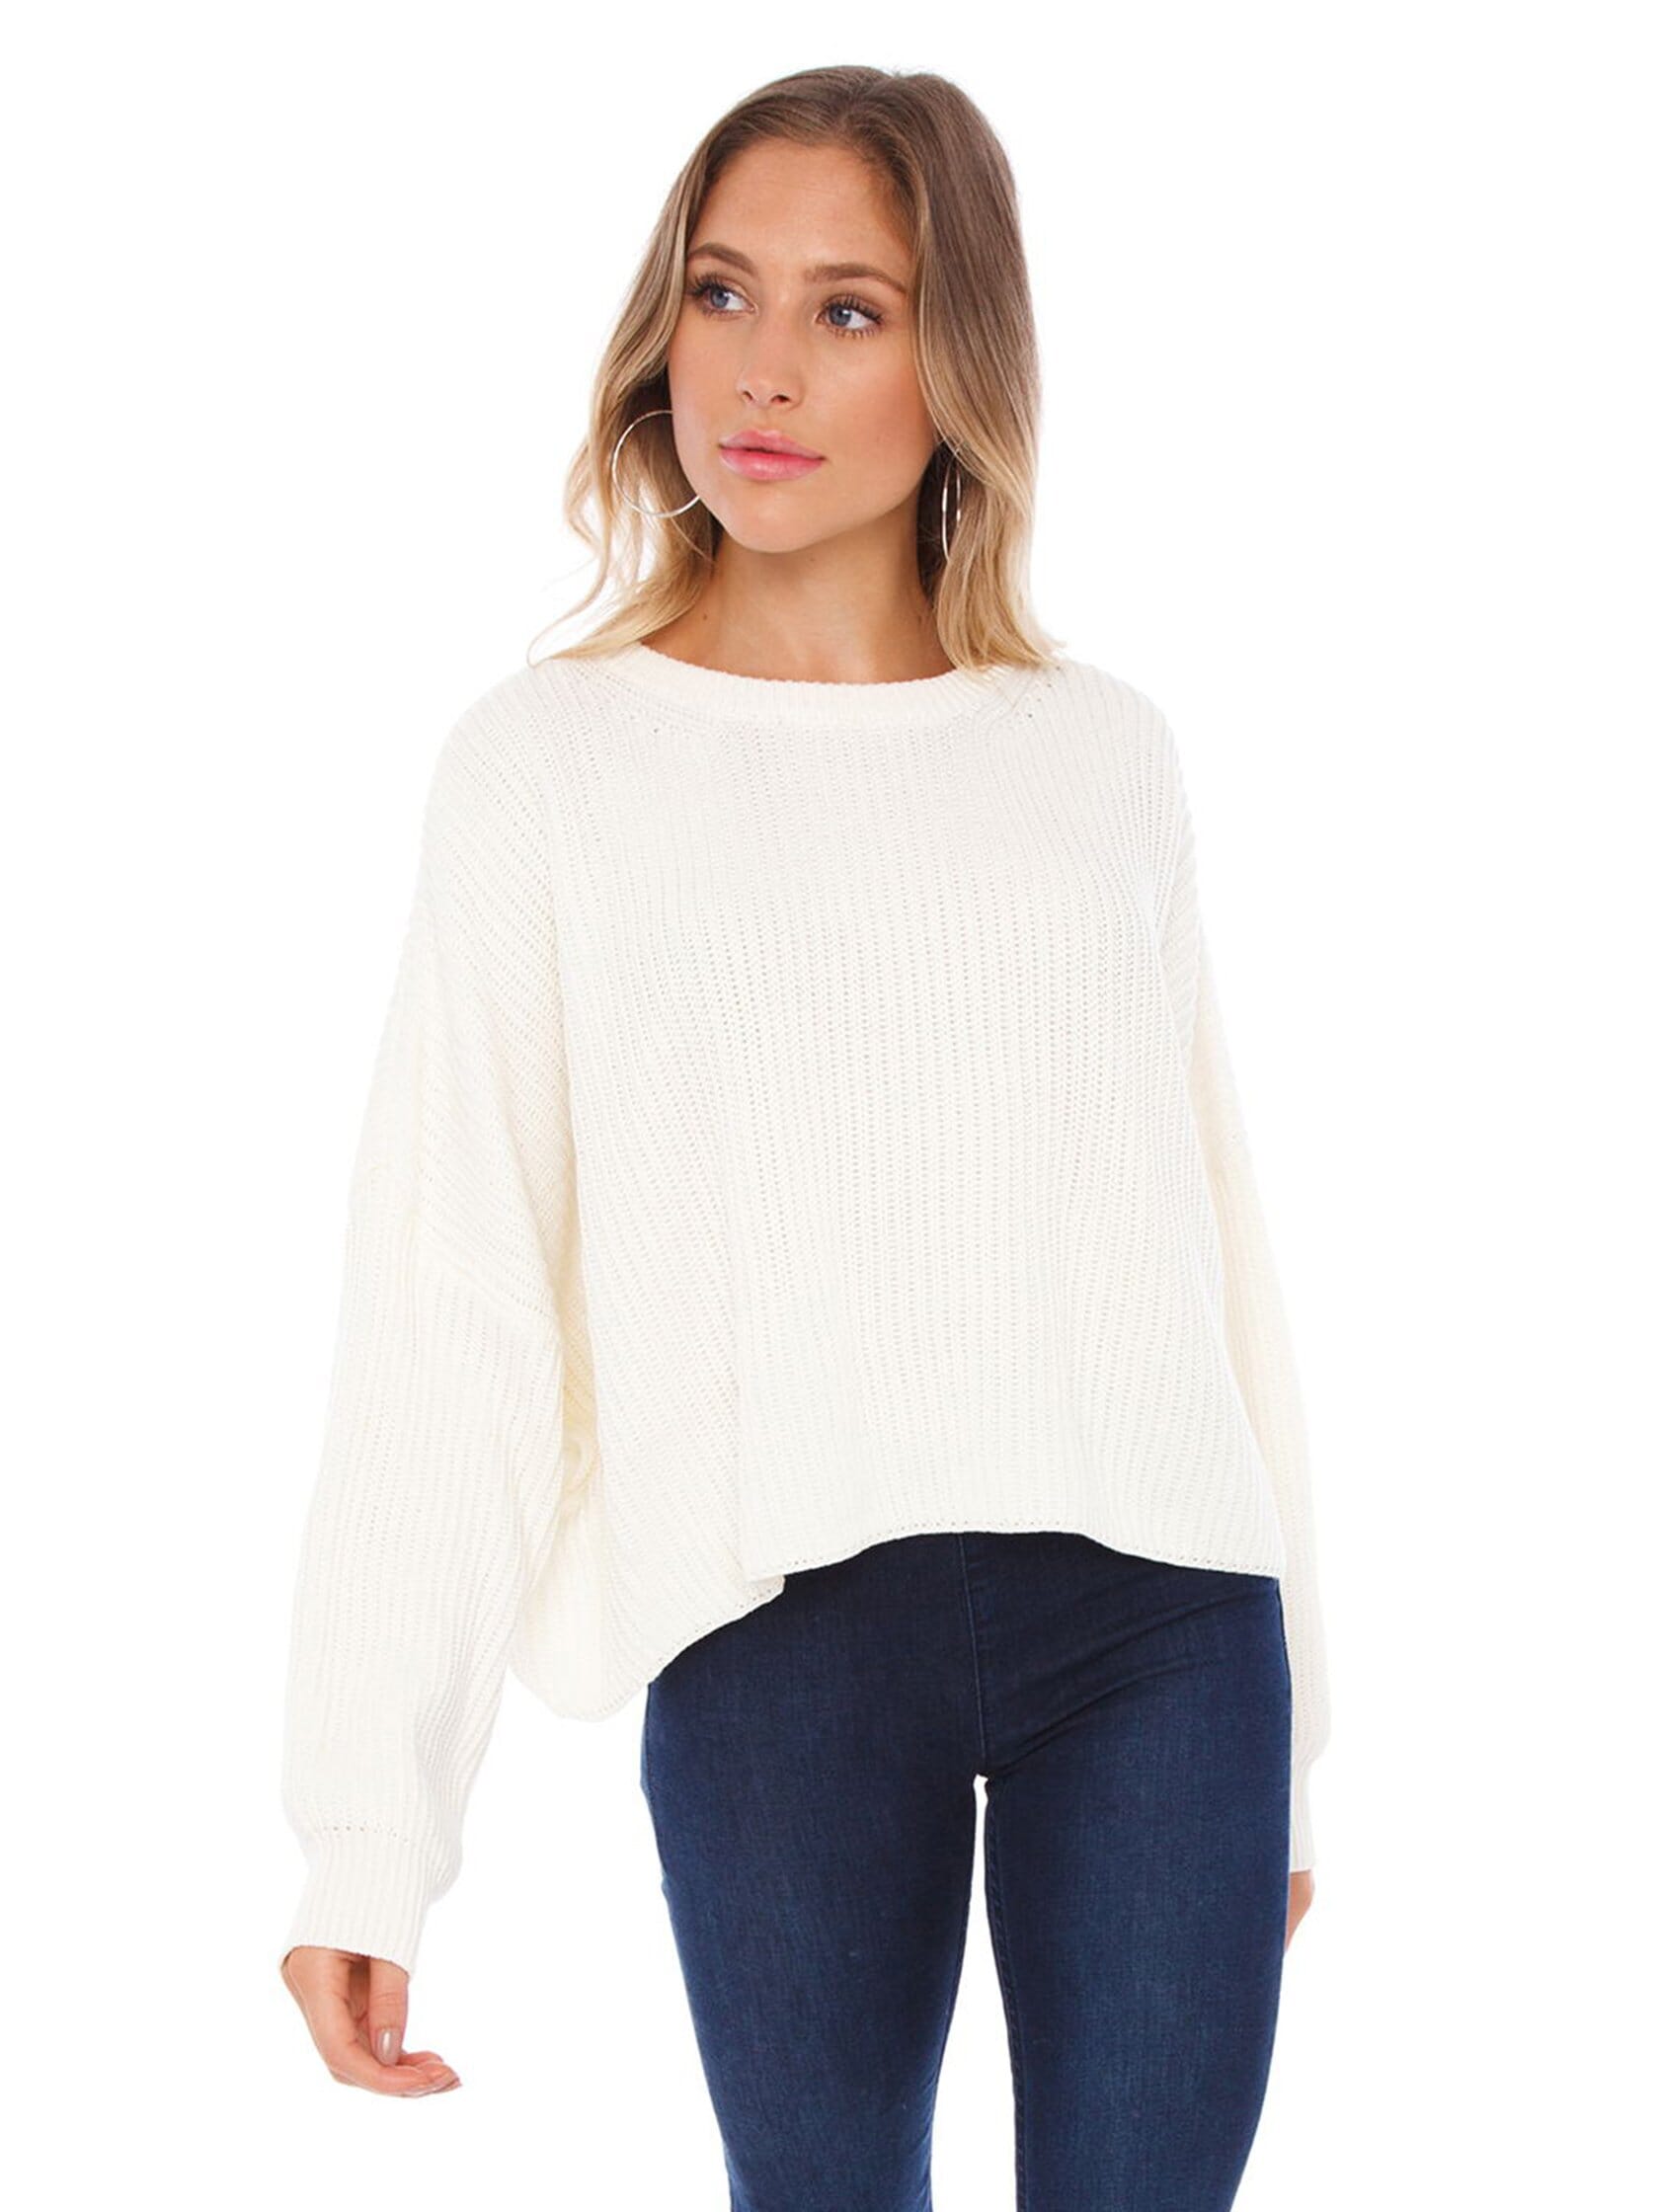 FashionPass Callie Sweater in Ivory